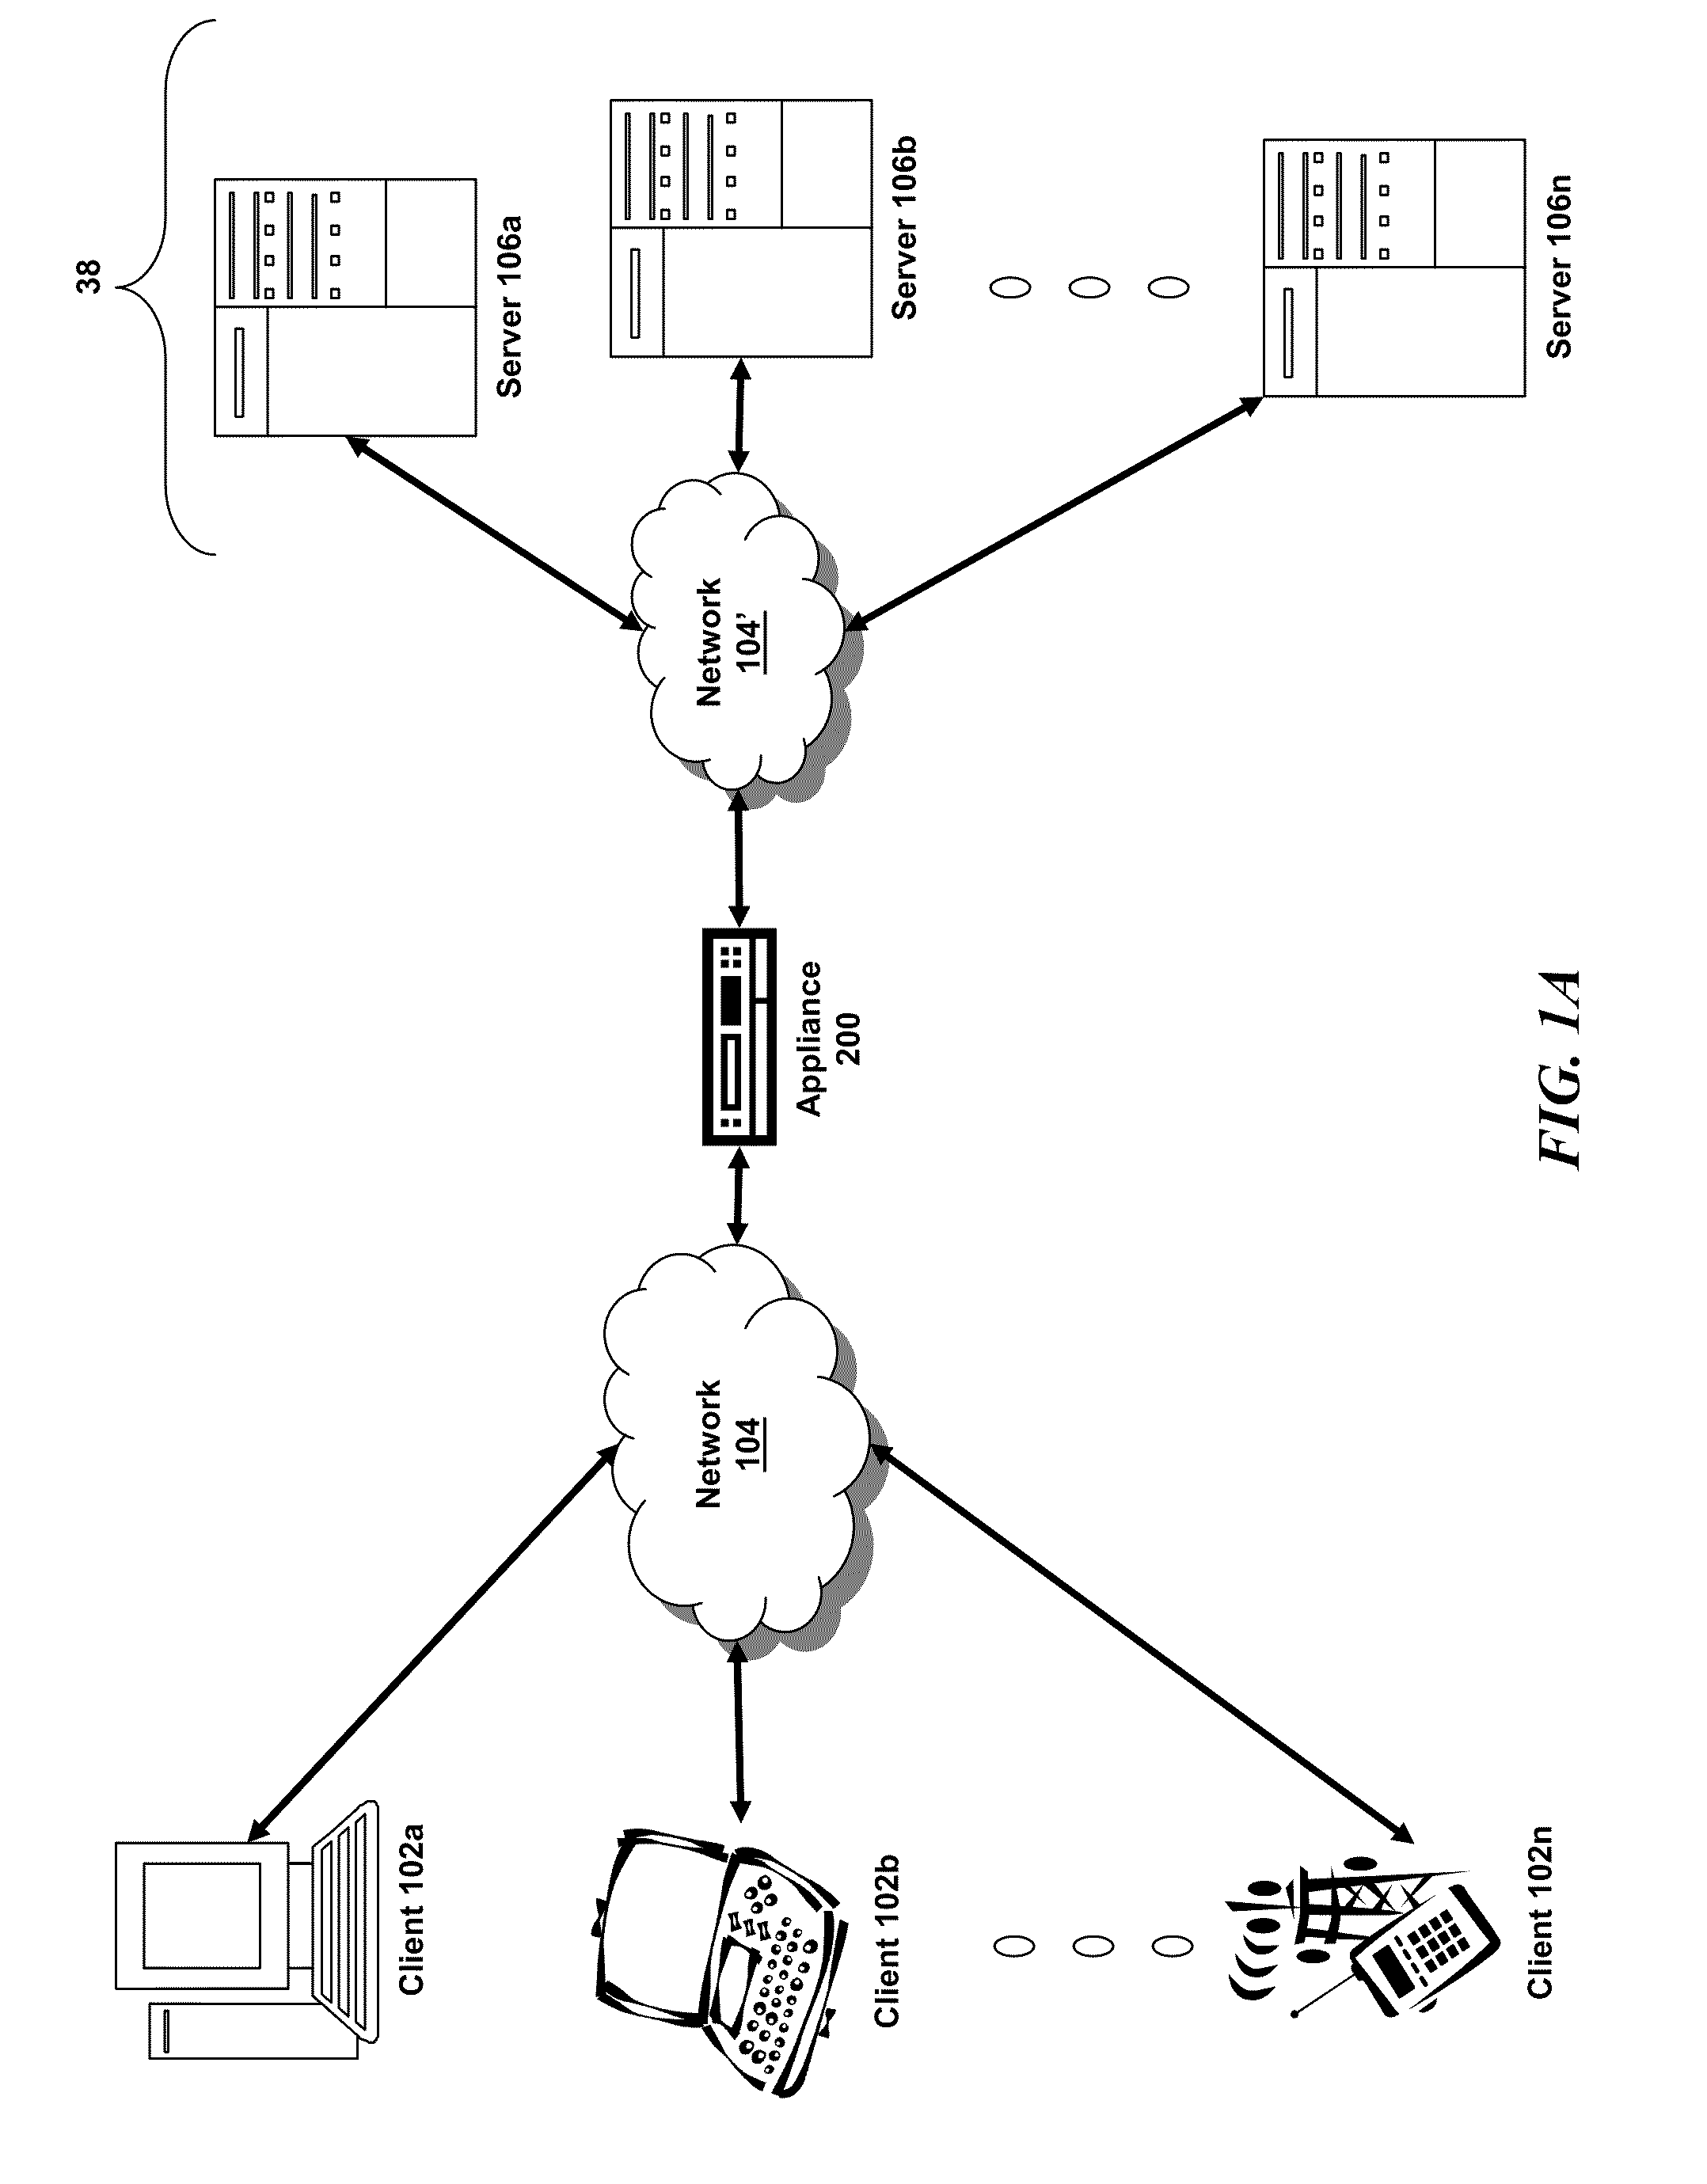 Systems and methods for rewriting a stream of data via intermediary